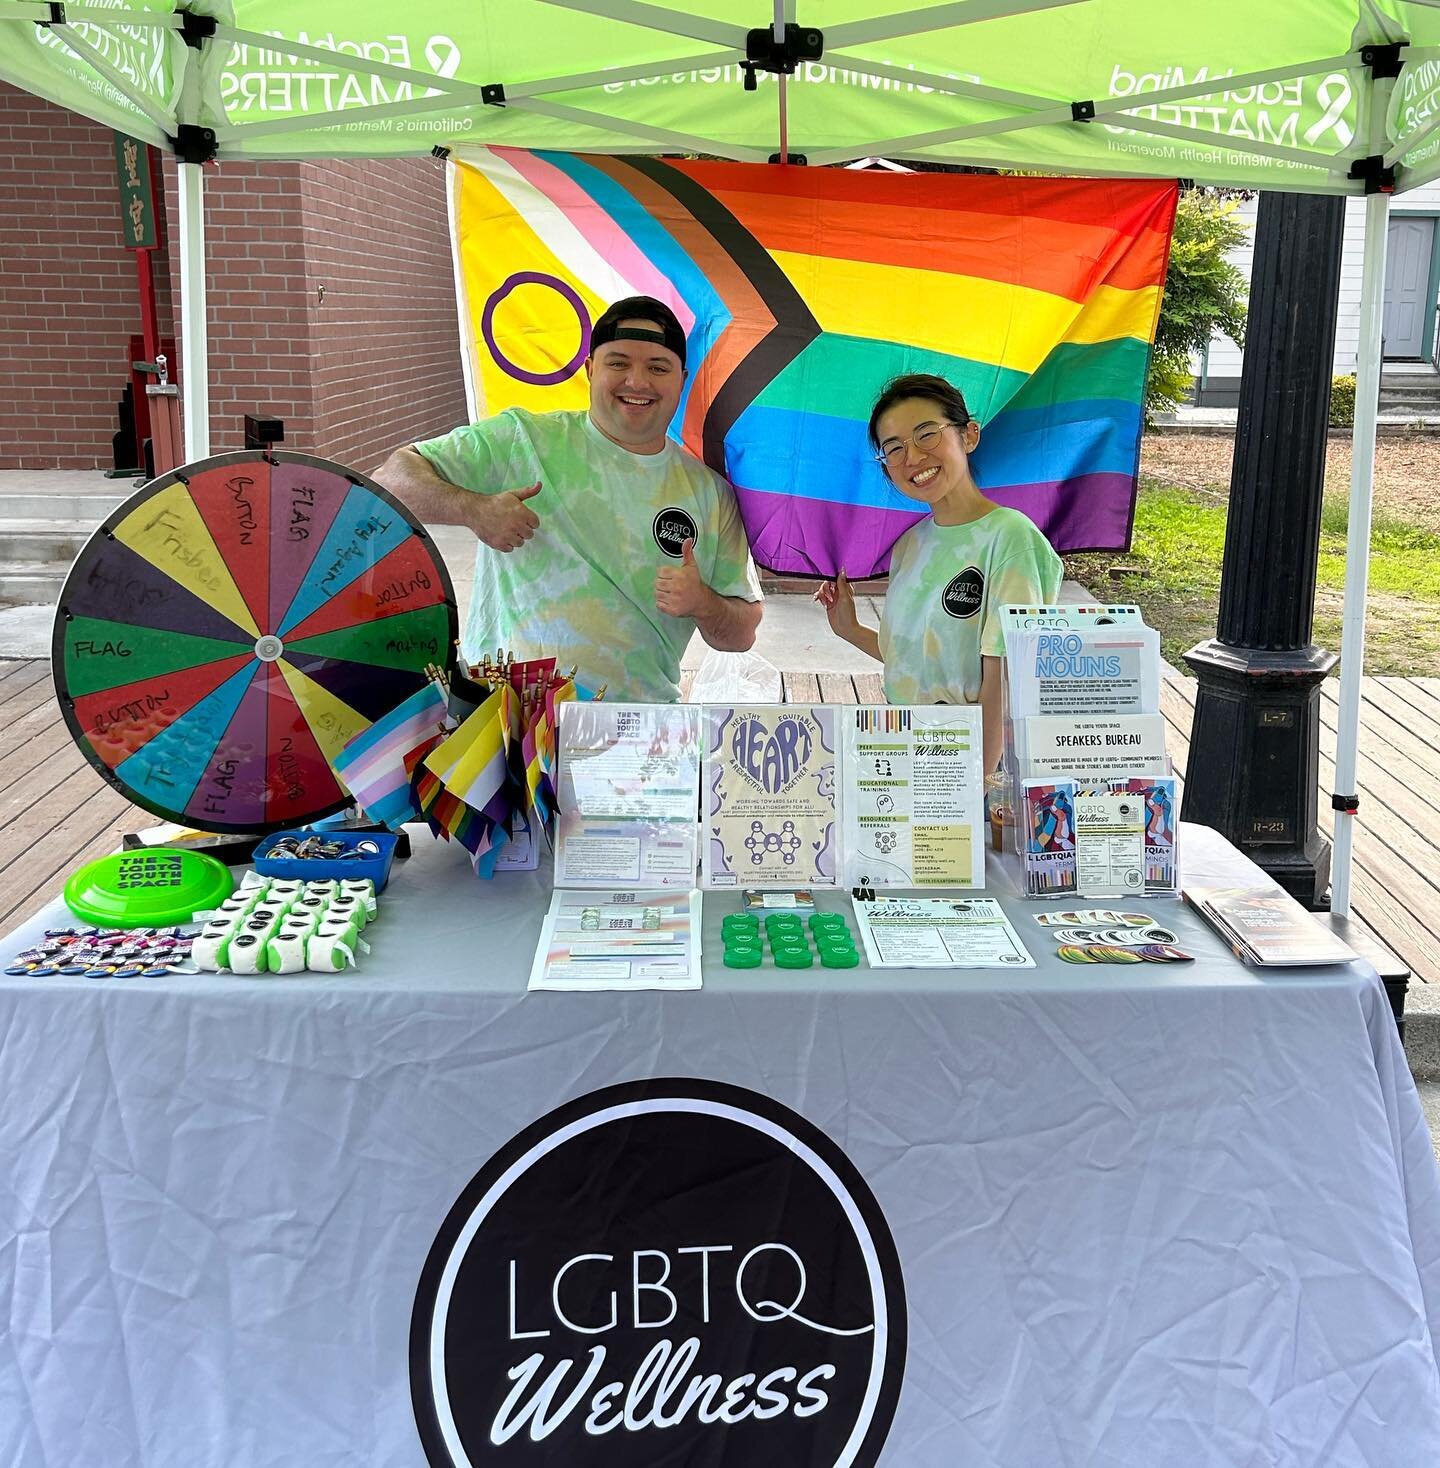 We had a great time tabling at Wellness Village Day this past weekend at San Jos&eacute; History Park with multiple cross cultural Santa Clara County service providers, such as our besties from @theqcorner who snapped this lovely pic for us 😚🏳️&zwj